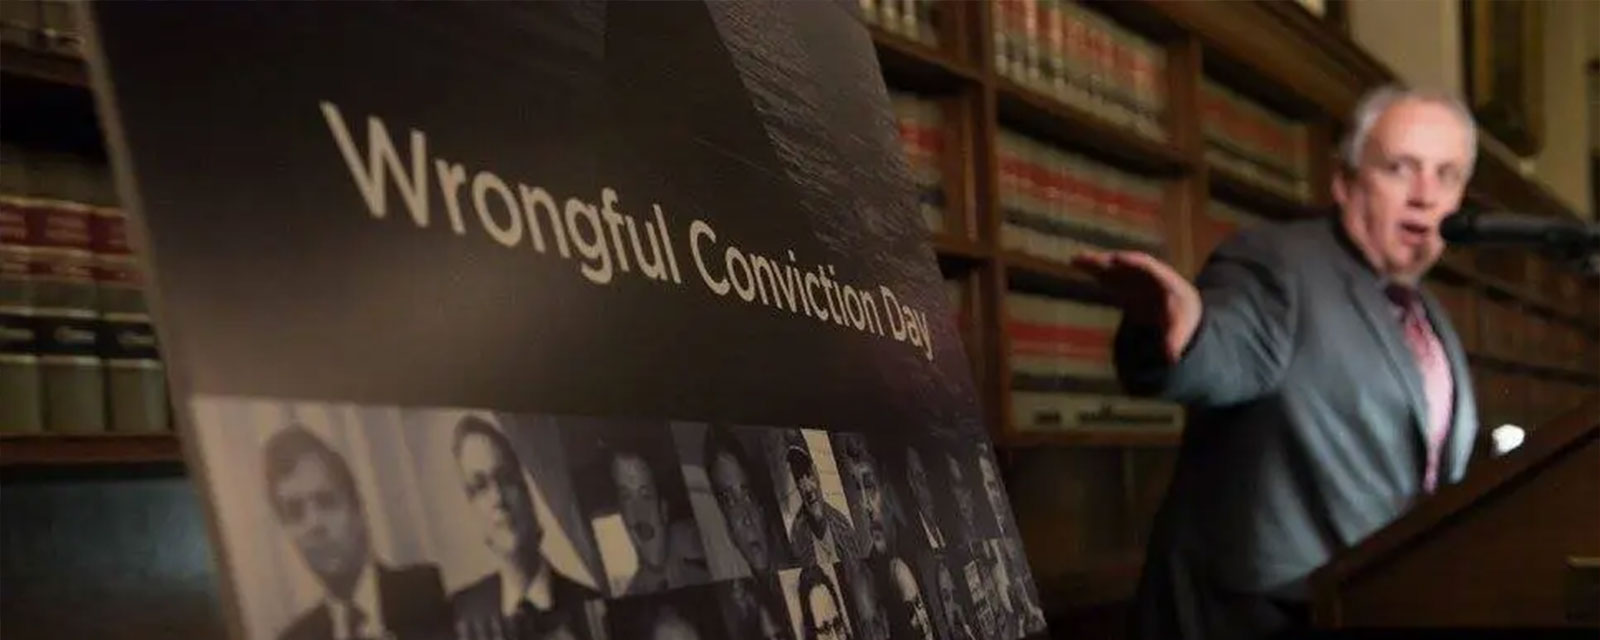 wrongful conviction lecture